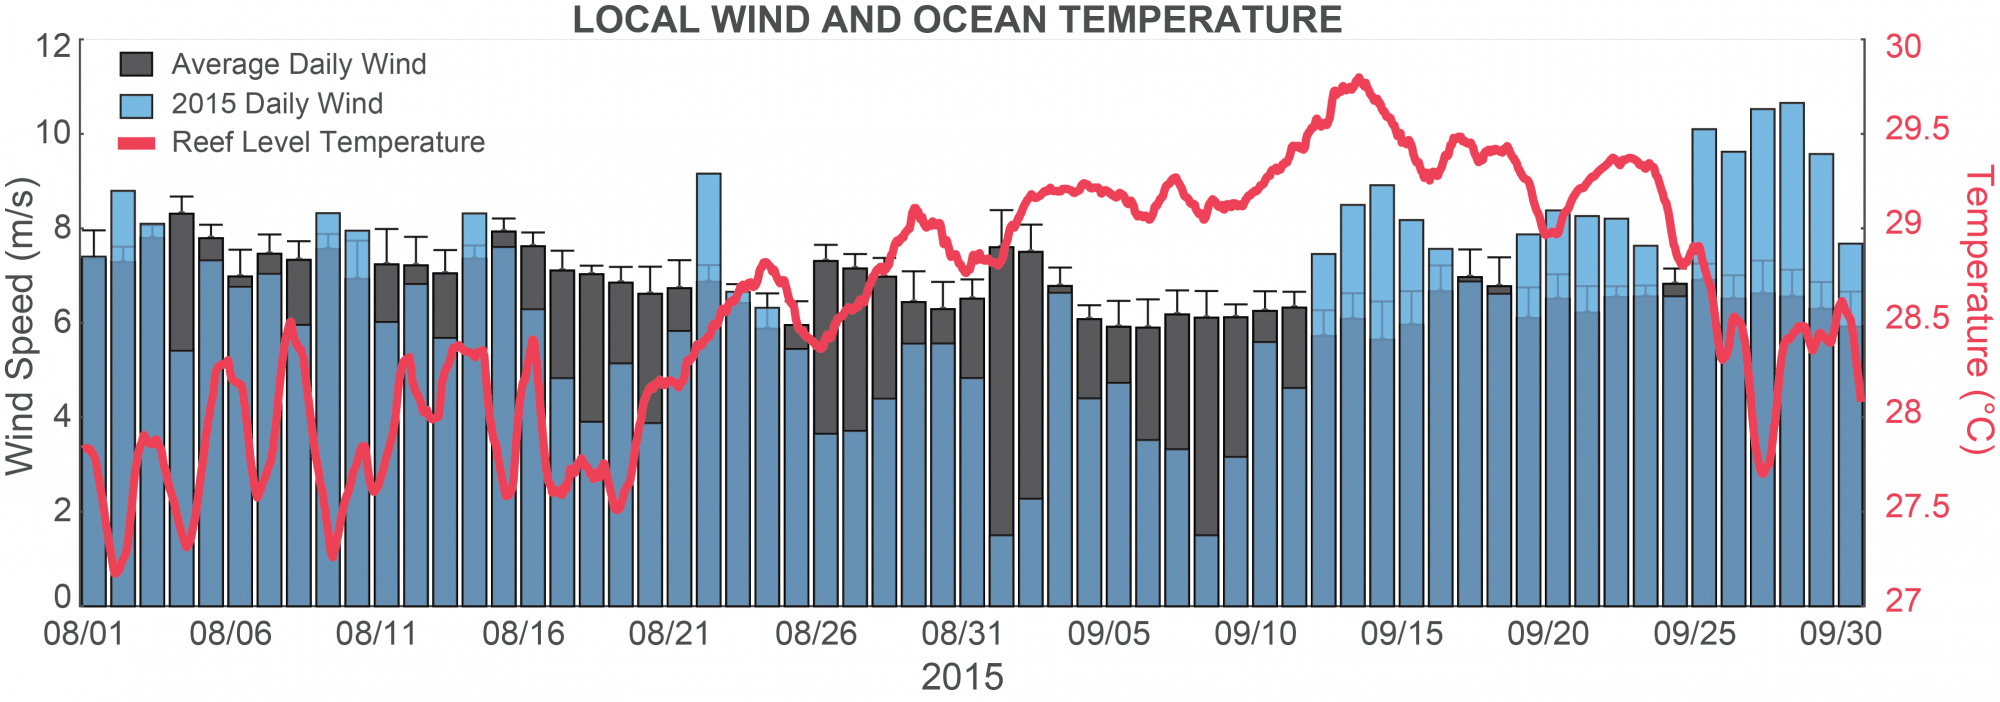 Local wind and ocean temperature observed during the 2015 thermal stress event (August–September, 2015) in West Hawai‘i. Long-term (2009–2014) averaged daily wind speed (gray bars, error bars represent ±1 standard deviation), daily wind speed (blue bars), and reef-level temperature (10 m; 33 ft) at Lapakahi, located approximately 16 km (10 miles) north of Kawaihae (red line), are shown. 